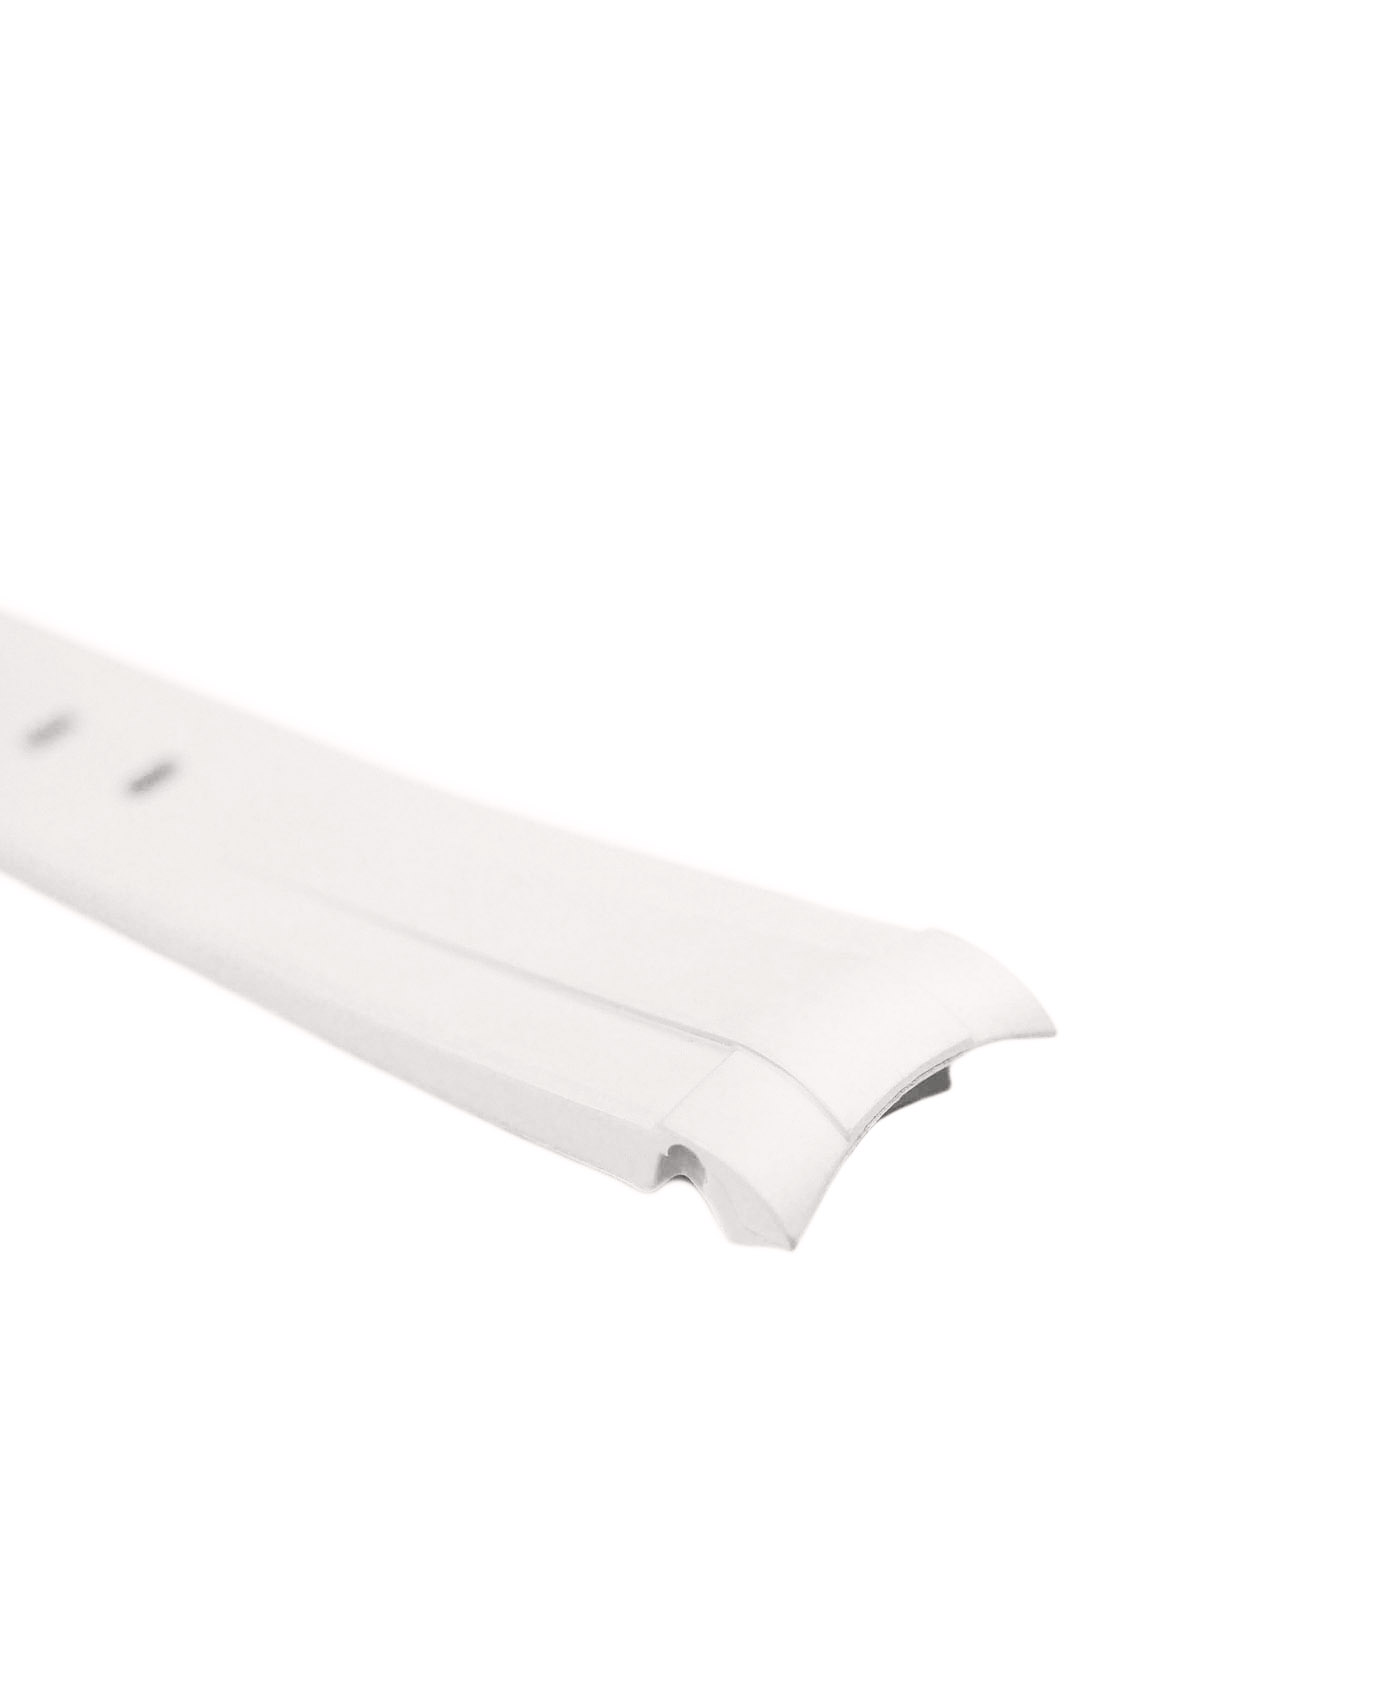 Curved-End-Rubber-Watch-Strap-White-WB-Original-side